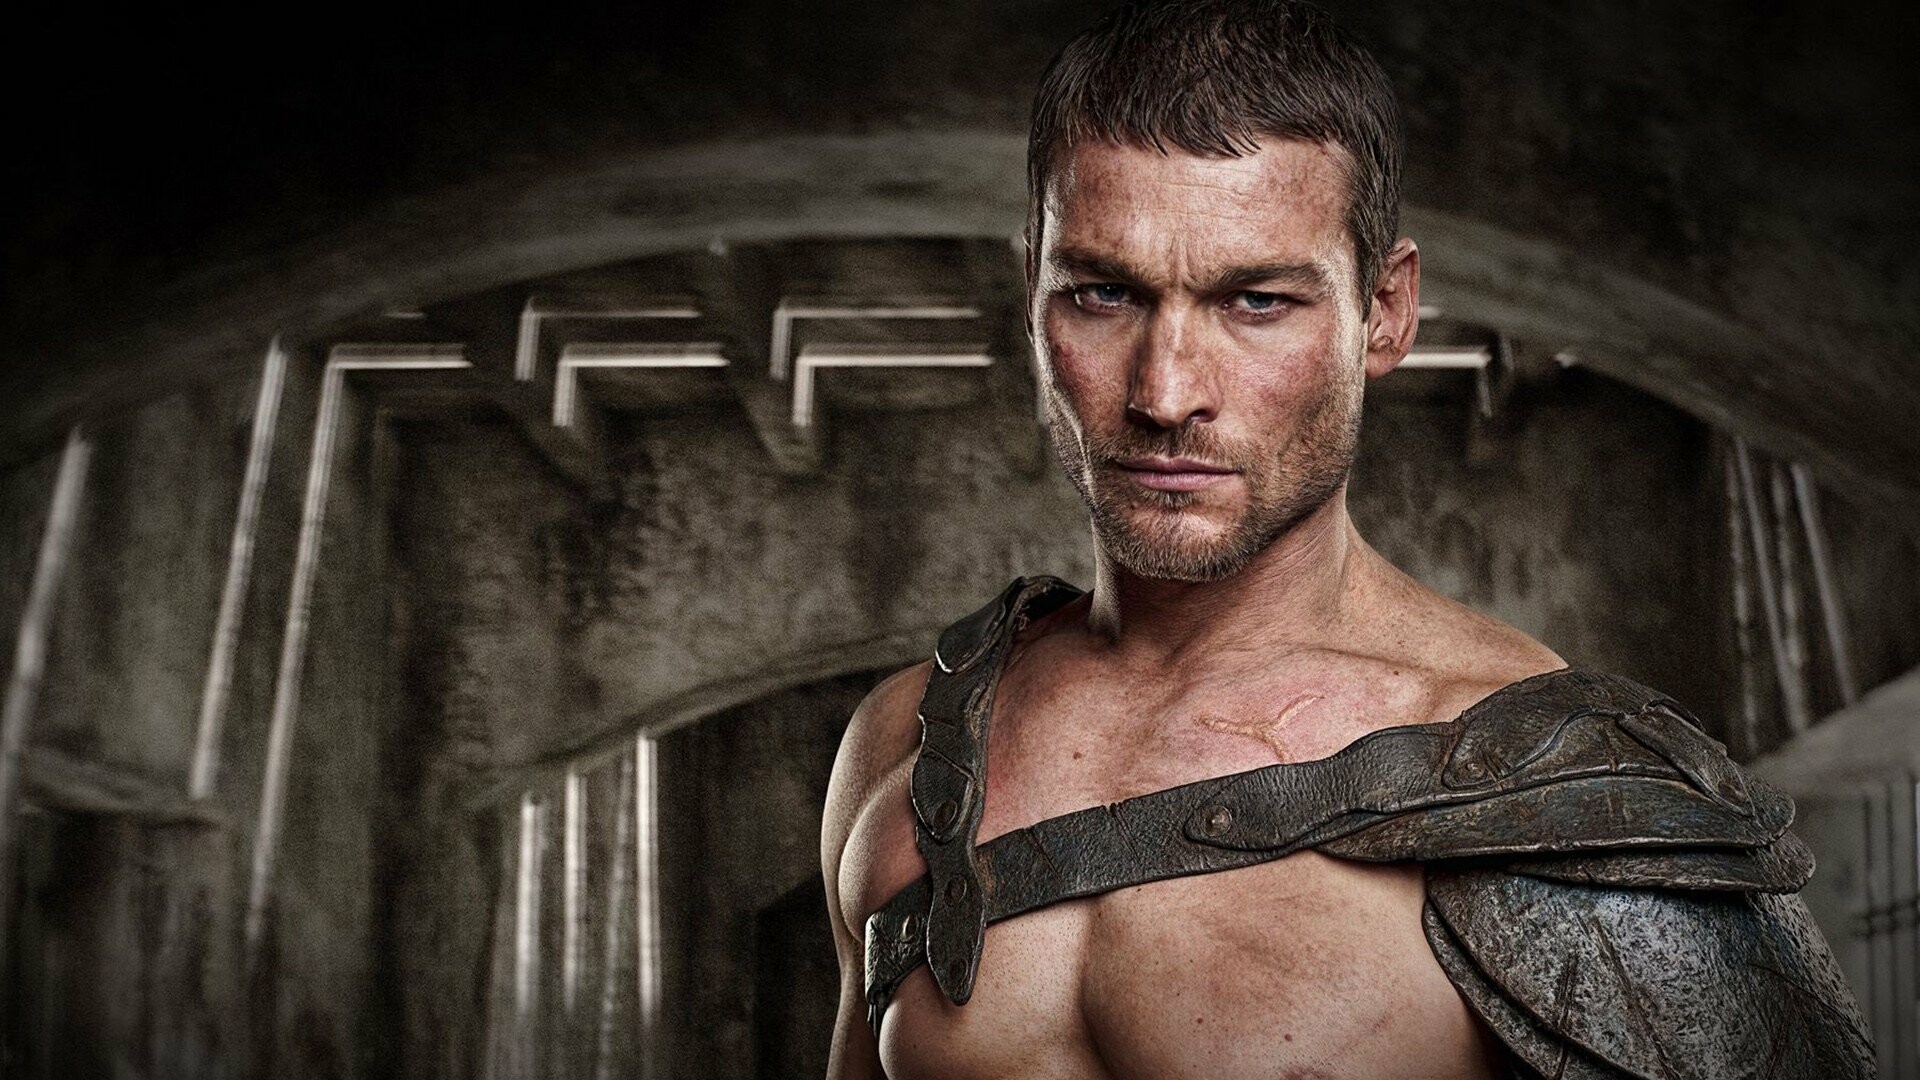 Spartacus: Blood and Sand: A gladiator in Batiatus' Ludus under the direction of Doctore and rivaled the then-Champion of Capua Crixus. 1920x1080 Full HD Wallpaper.